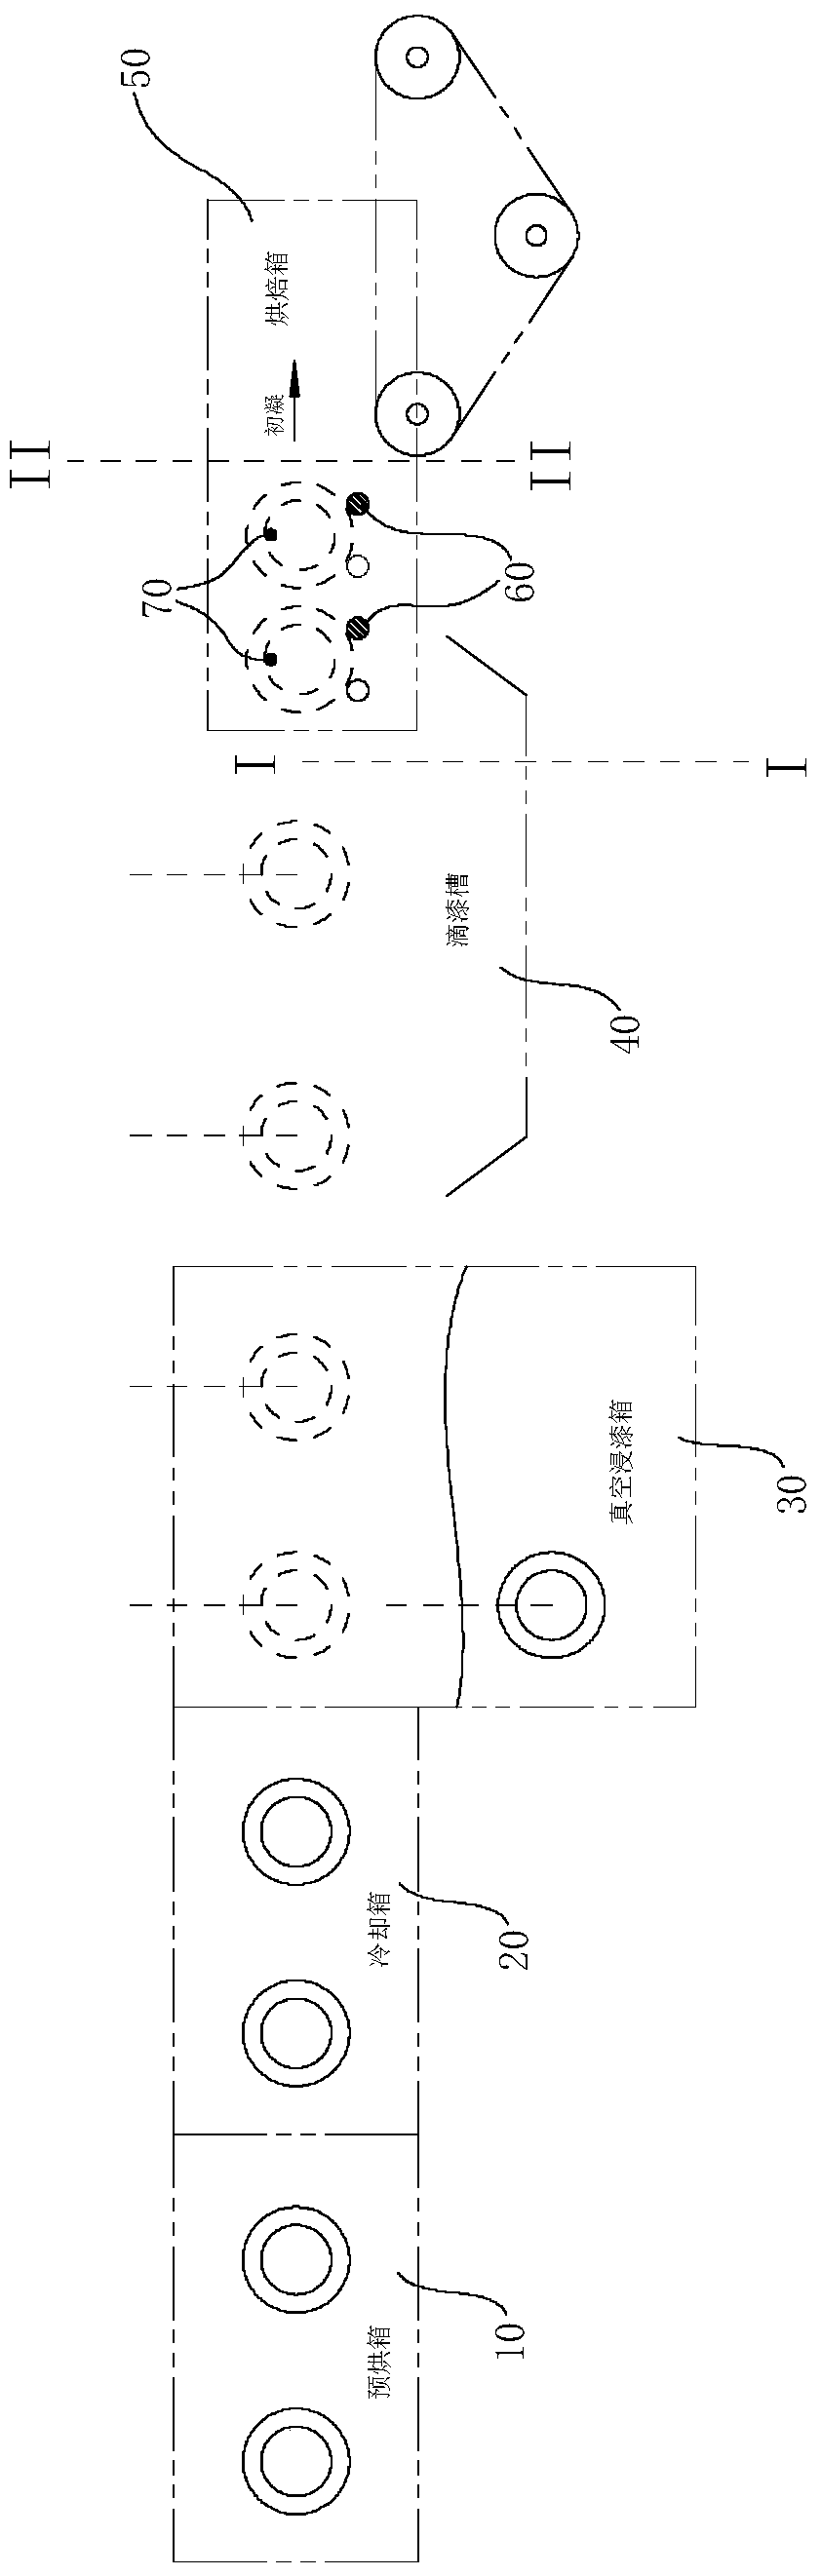 Method and system for varnish dipping of motor with winding stator